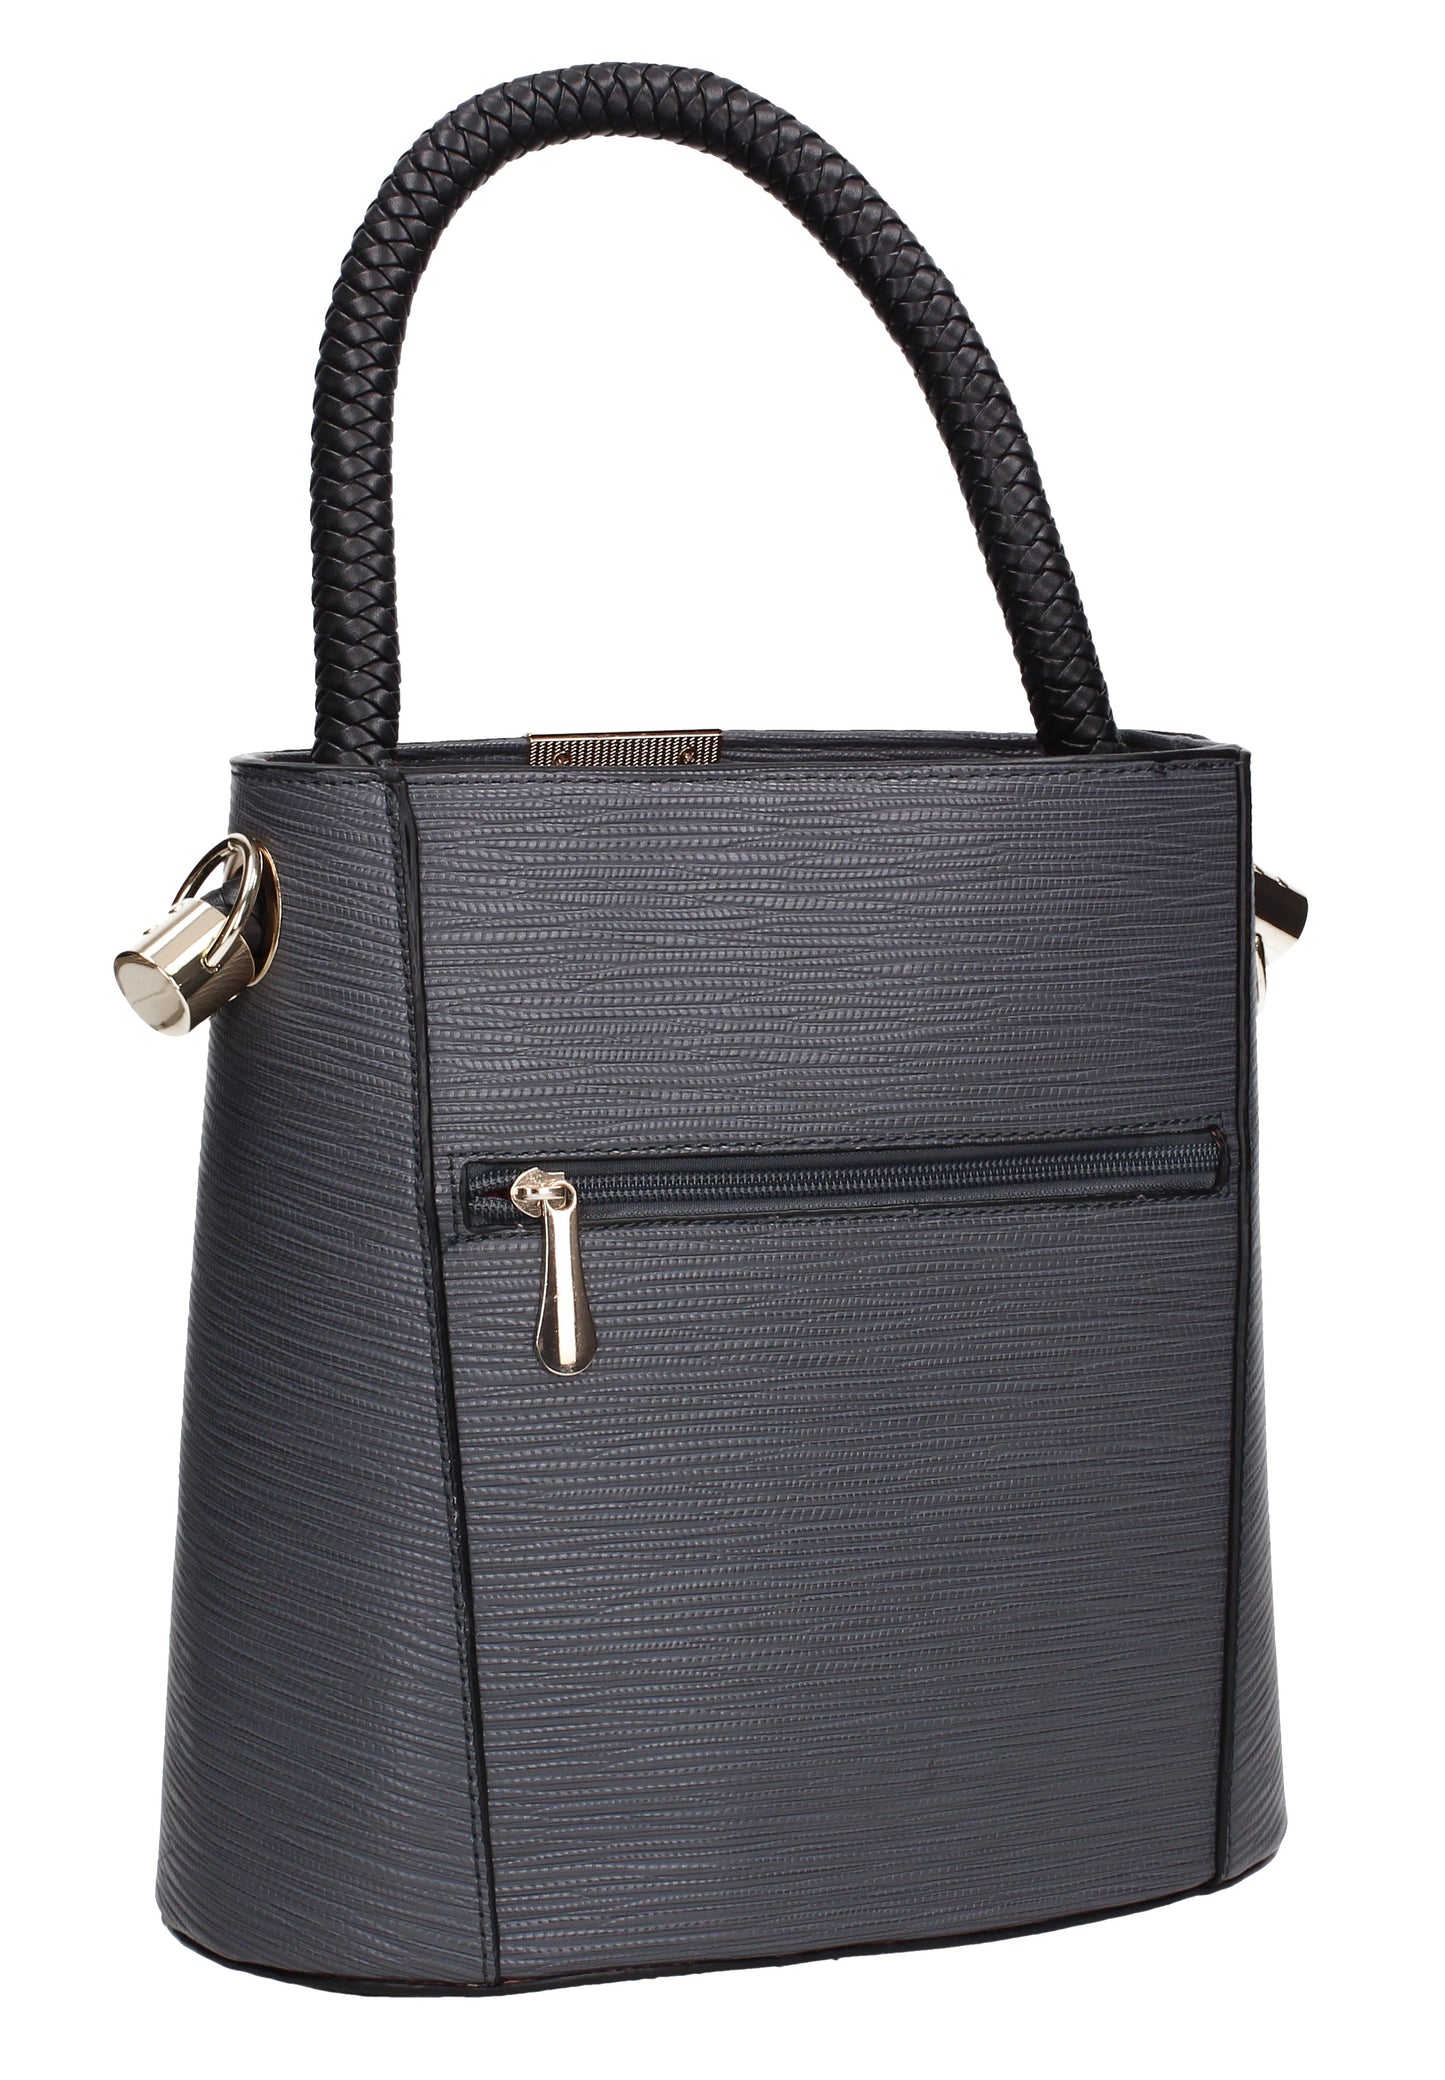 Buy your Eden Handbag Grey Today! Buy with confidence from Swankyswans